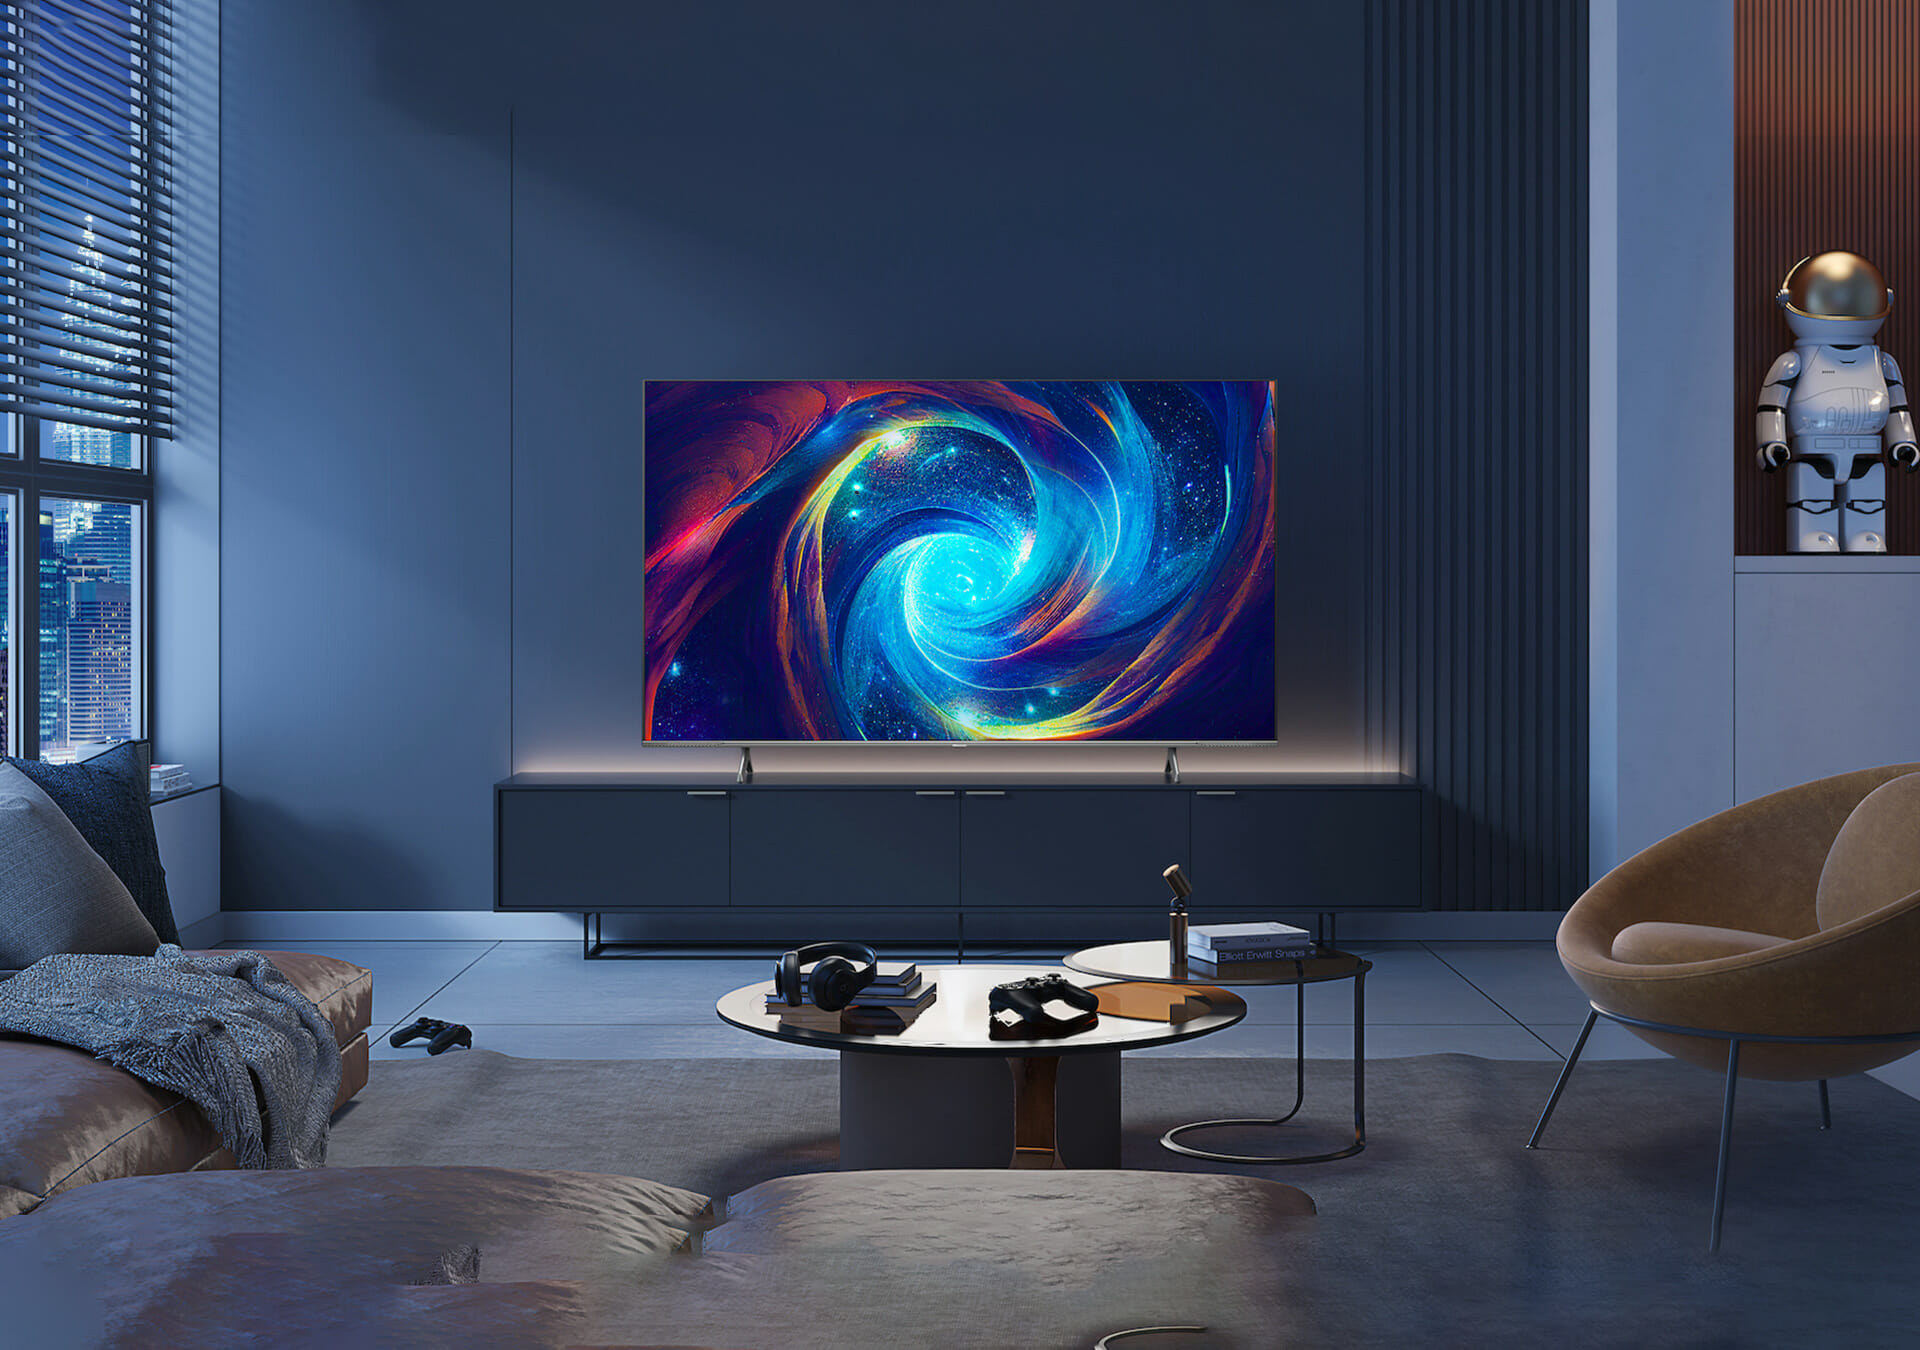 Three new QLED TV series from Hisense provide gaming and pure entertainment